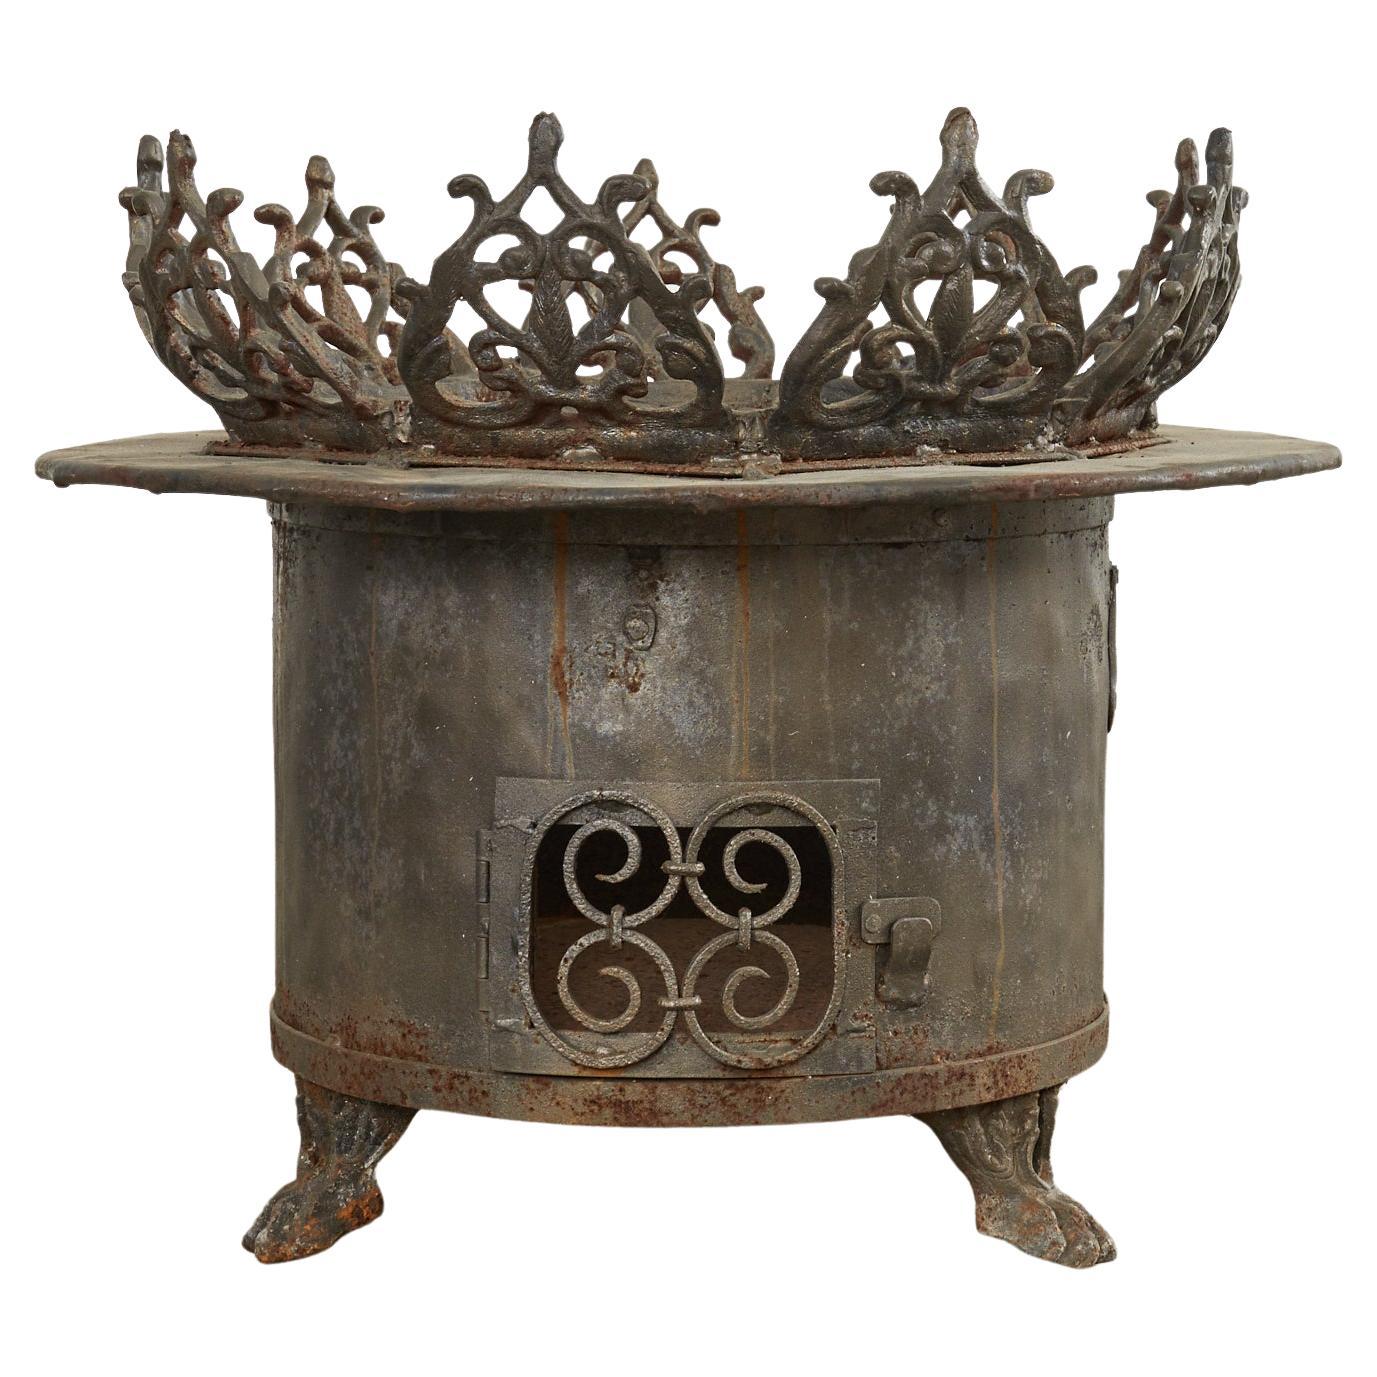 Baroque Style Wrought Iron Brazier Fire Pit or Chimnea